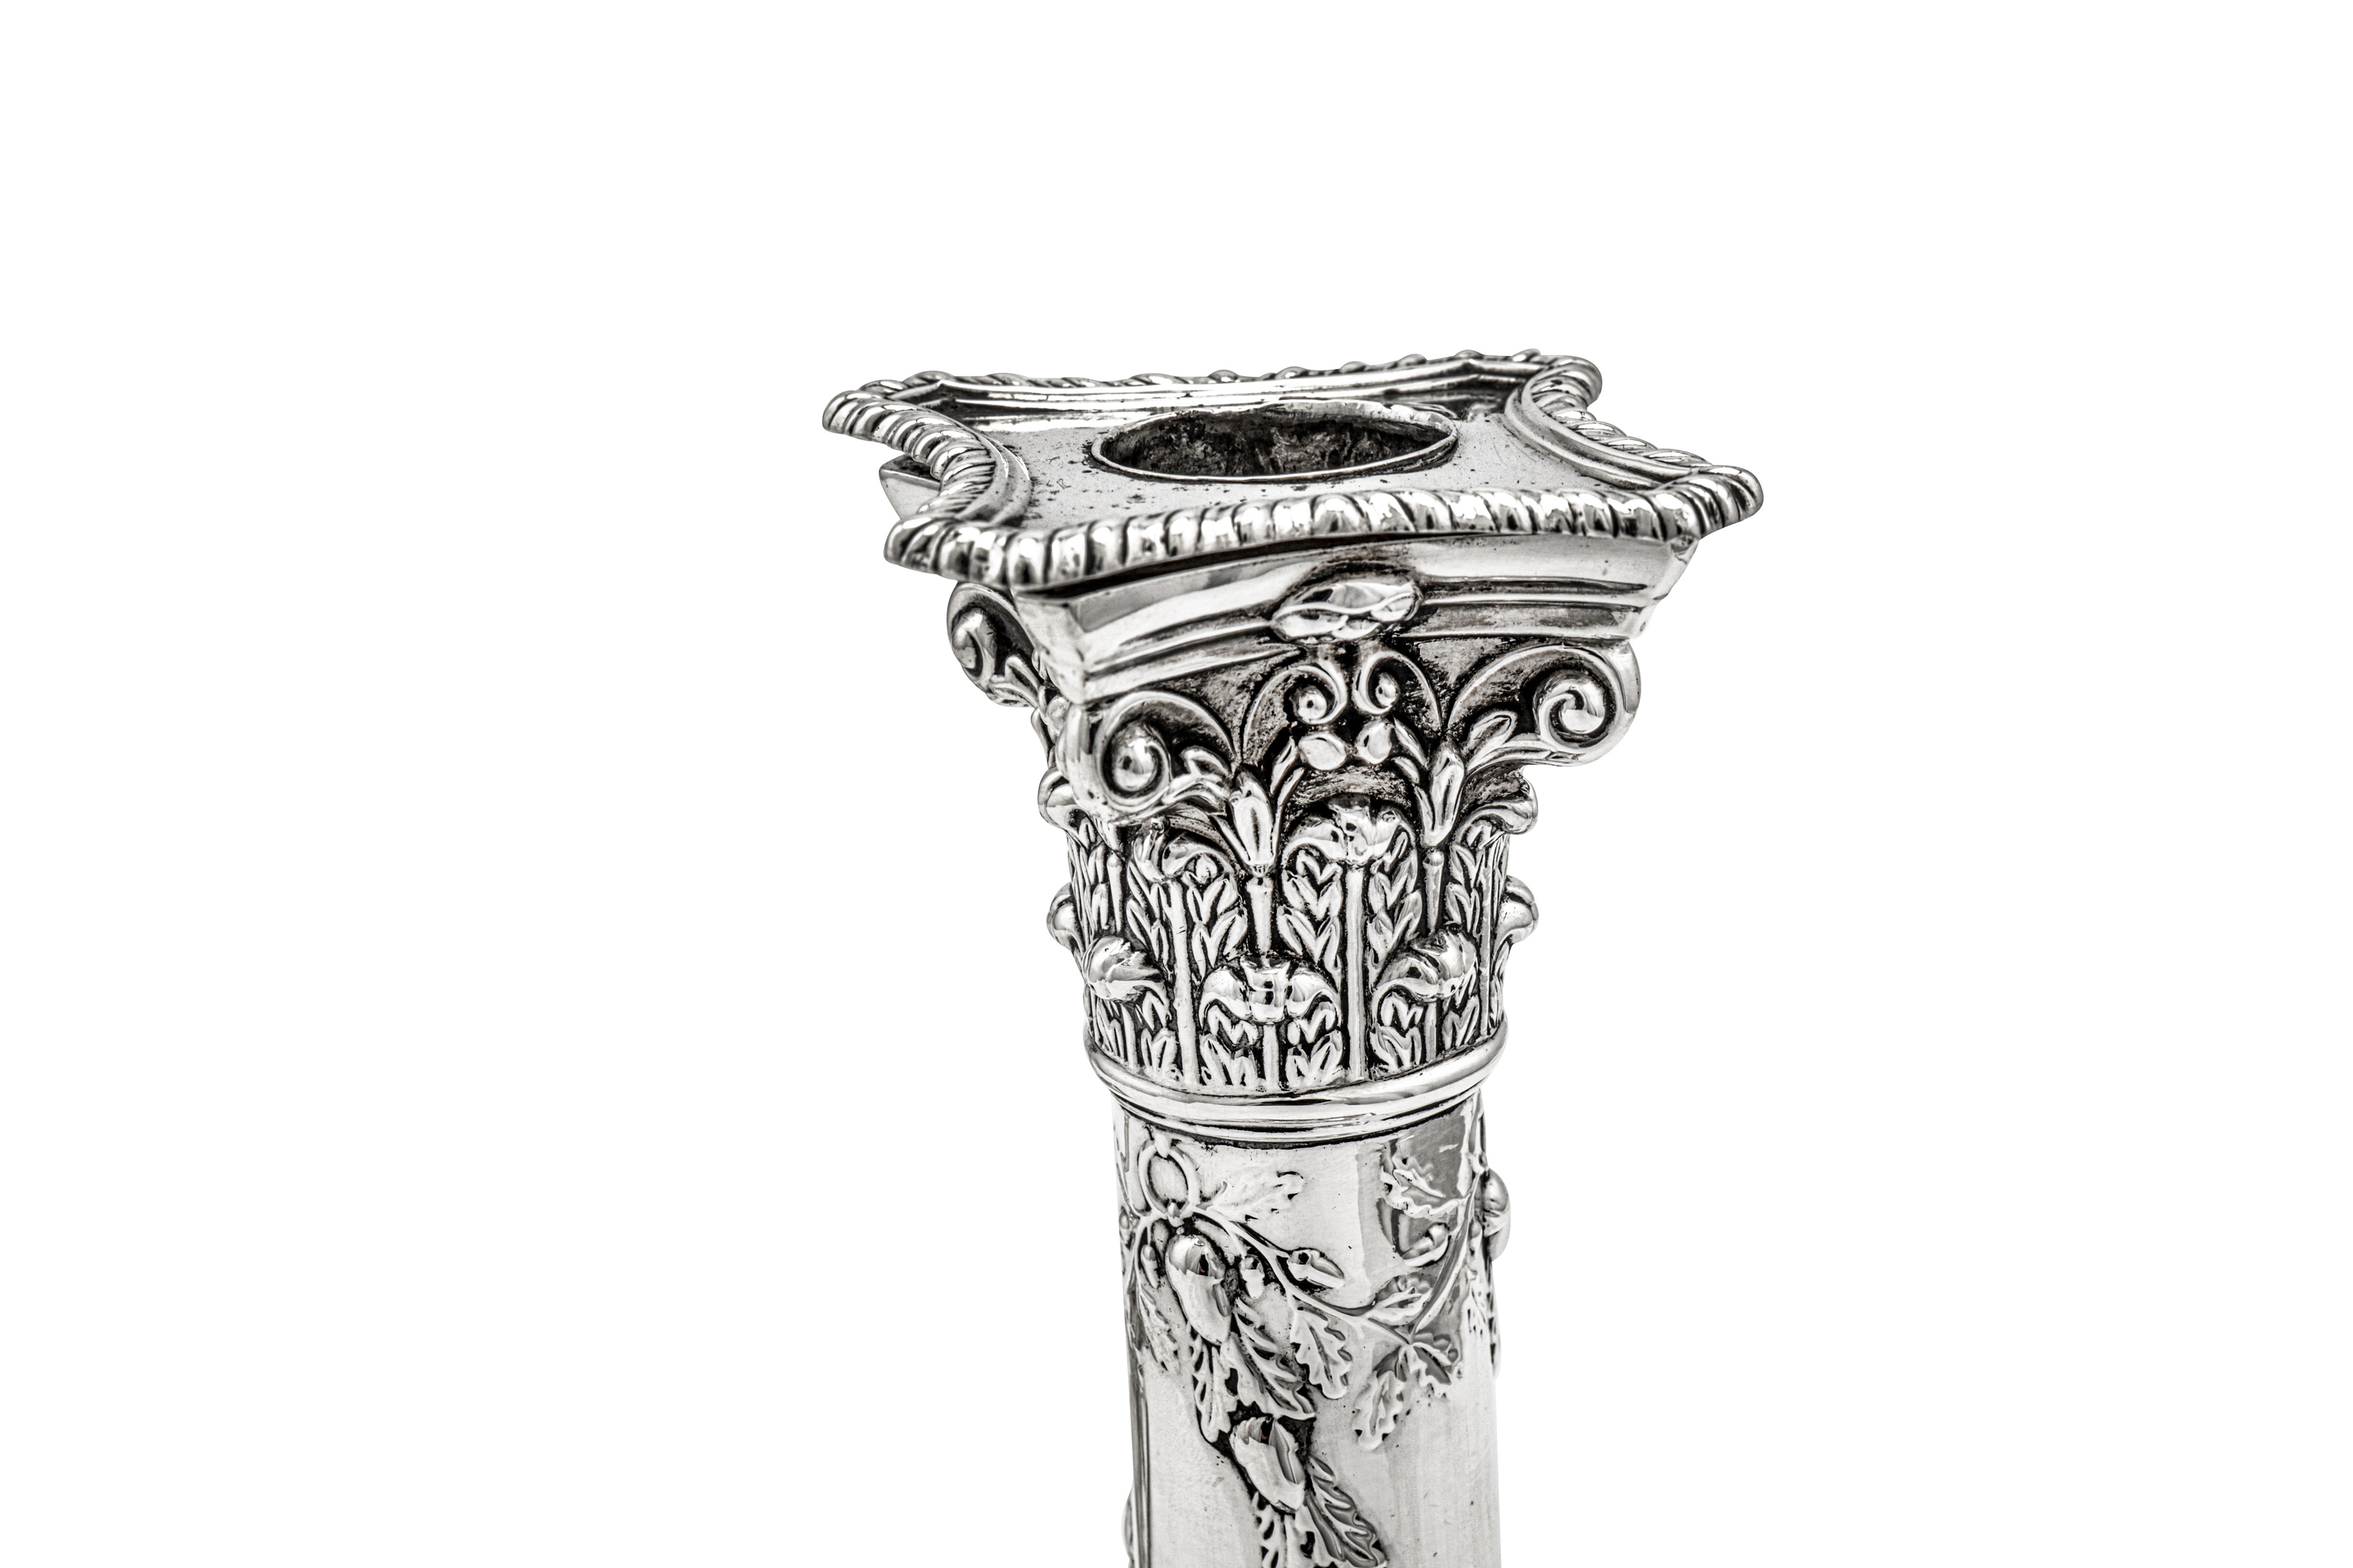 A pair of Victorian sterling silver candlesticks, London 1899 by Thomas Bradbury and Sons - Image 4 of 7